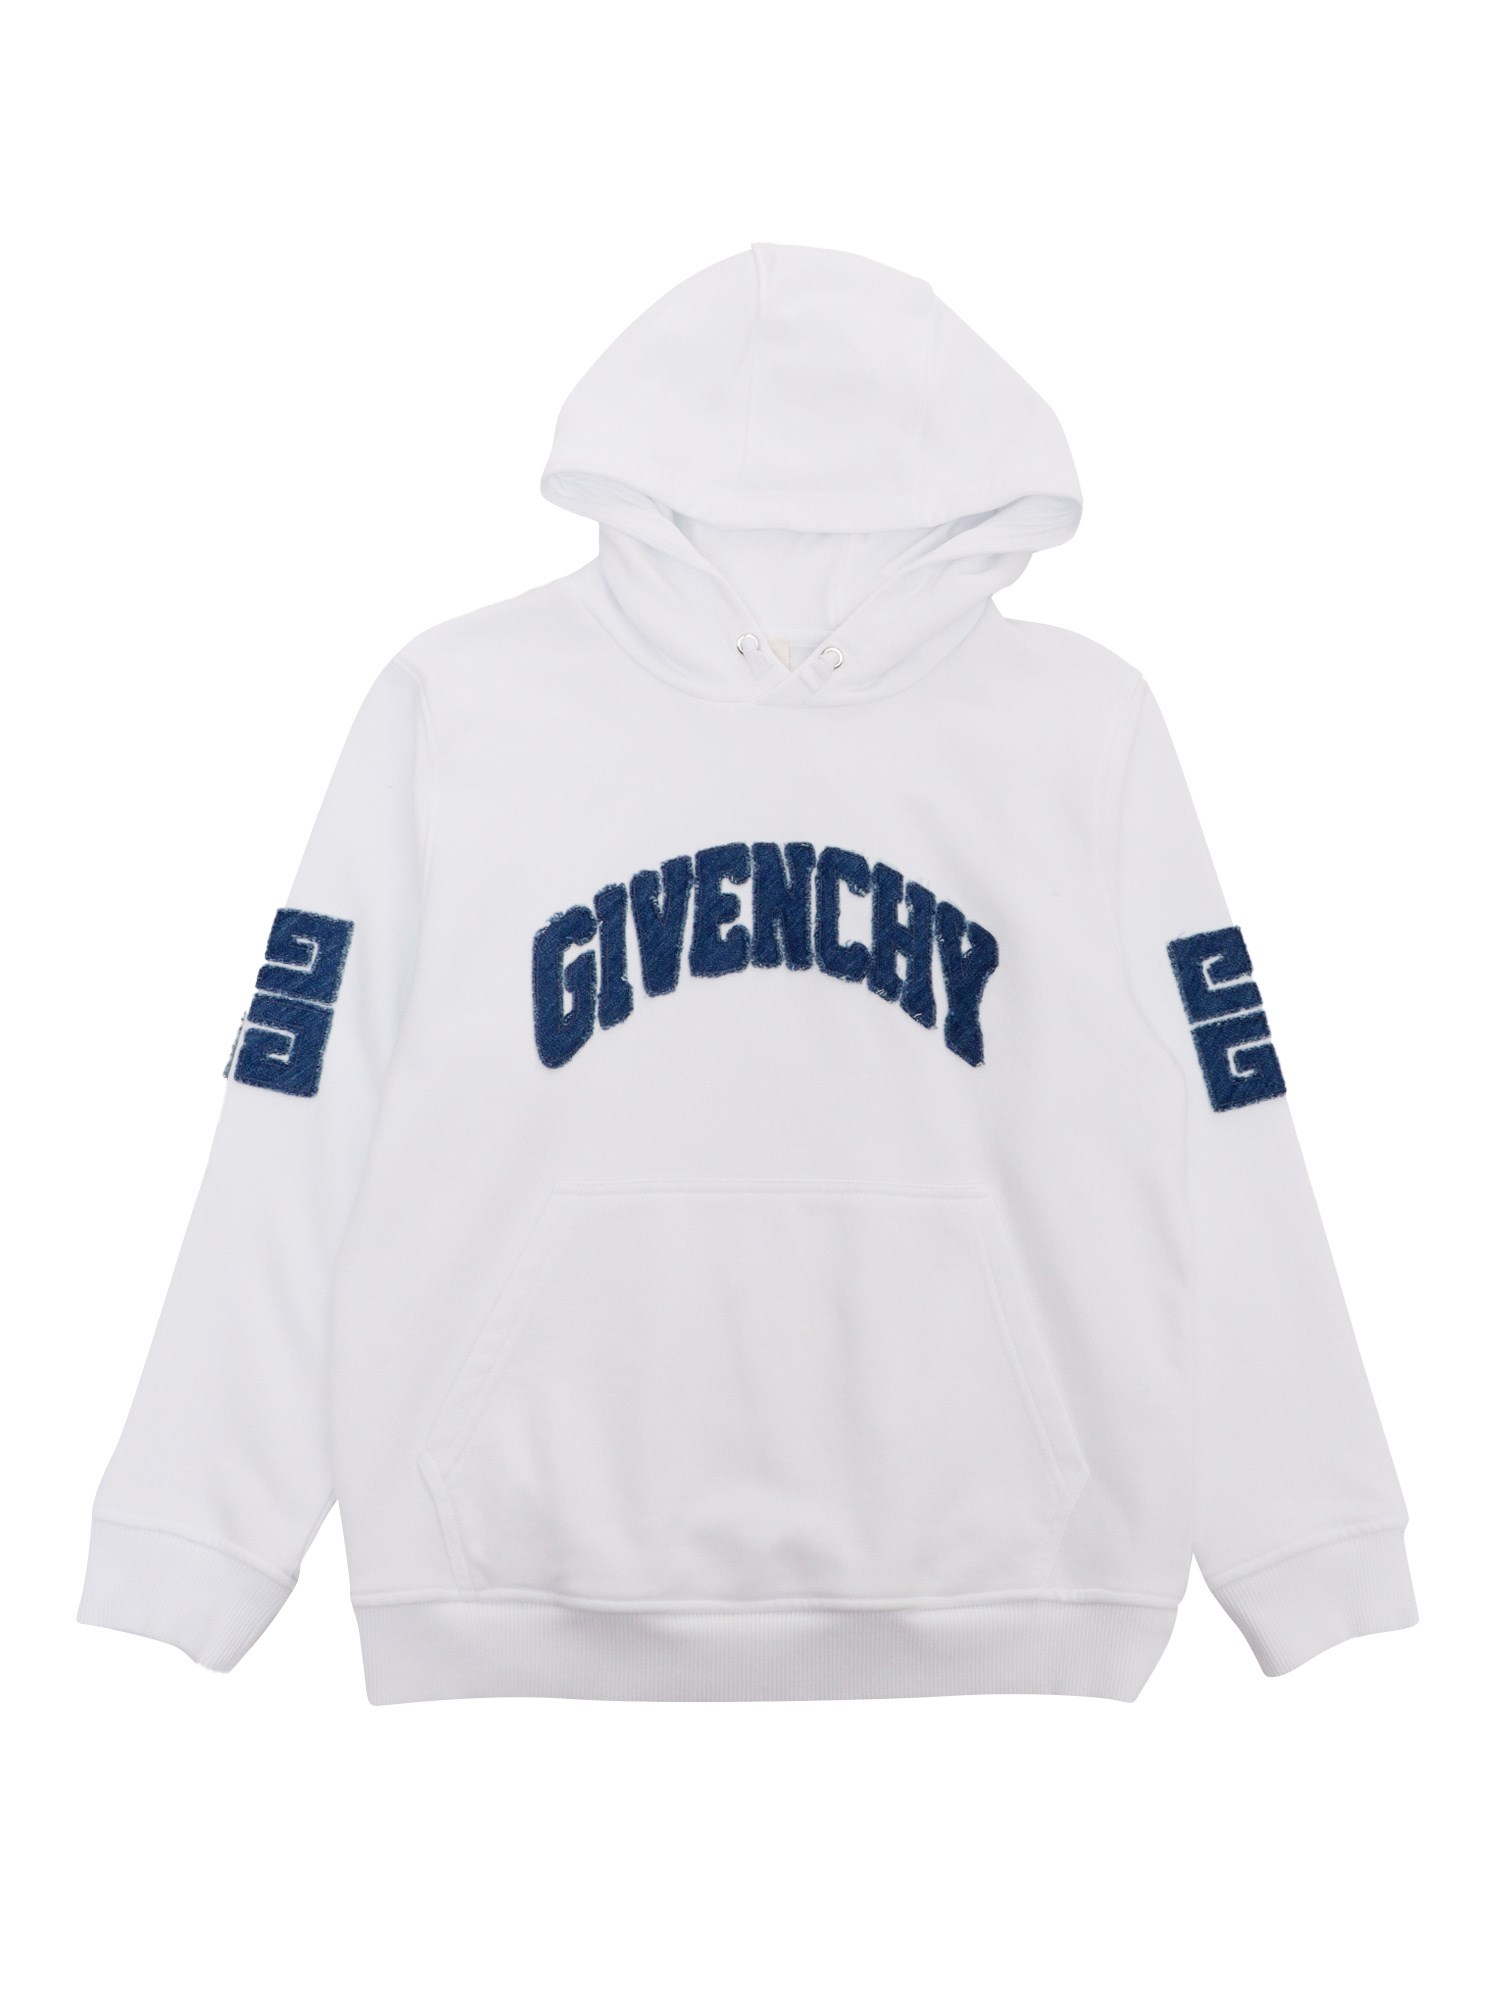 Givenchy White Sweater With Embroidered Logo